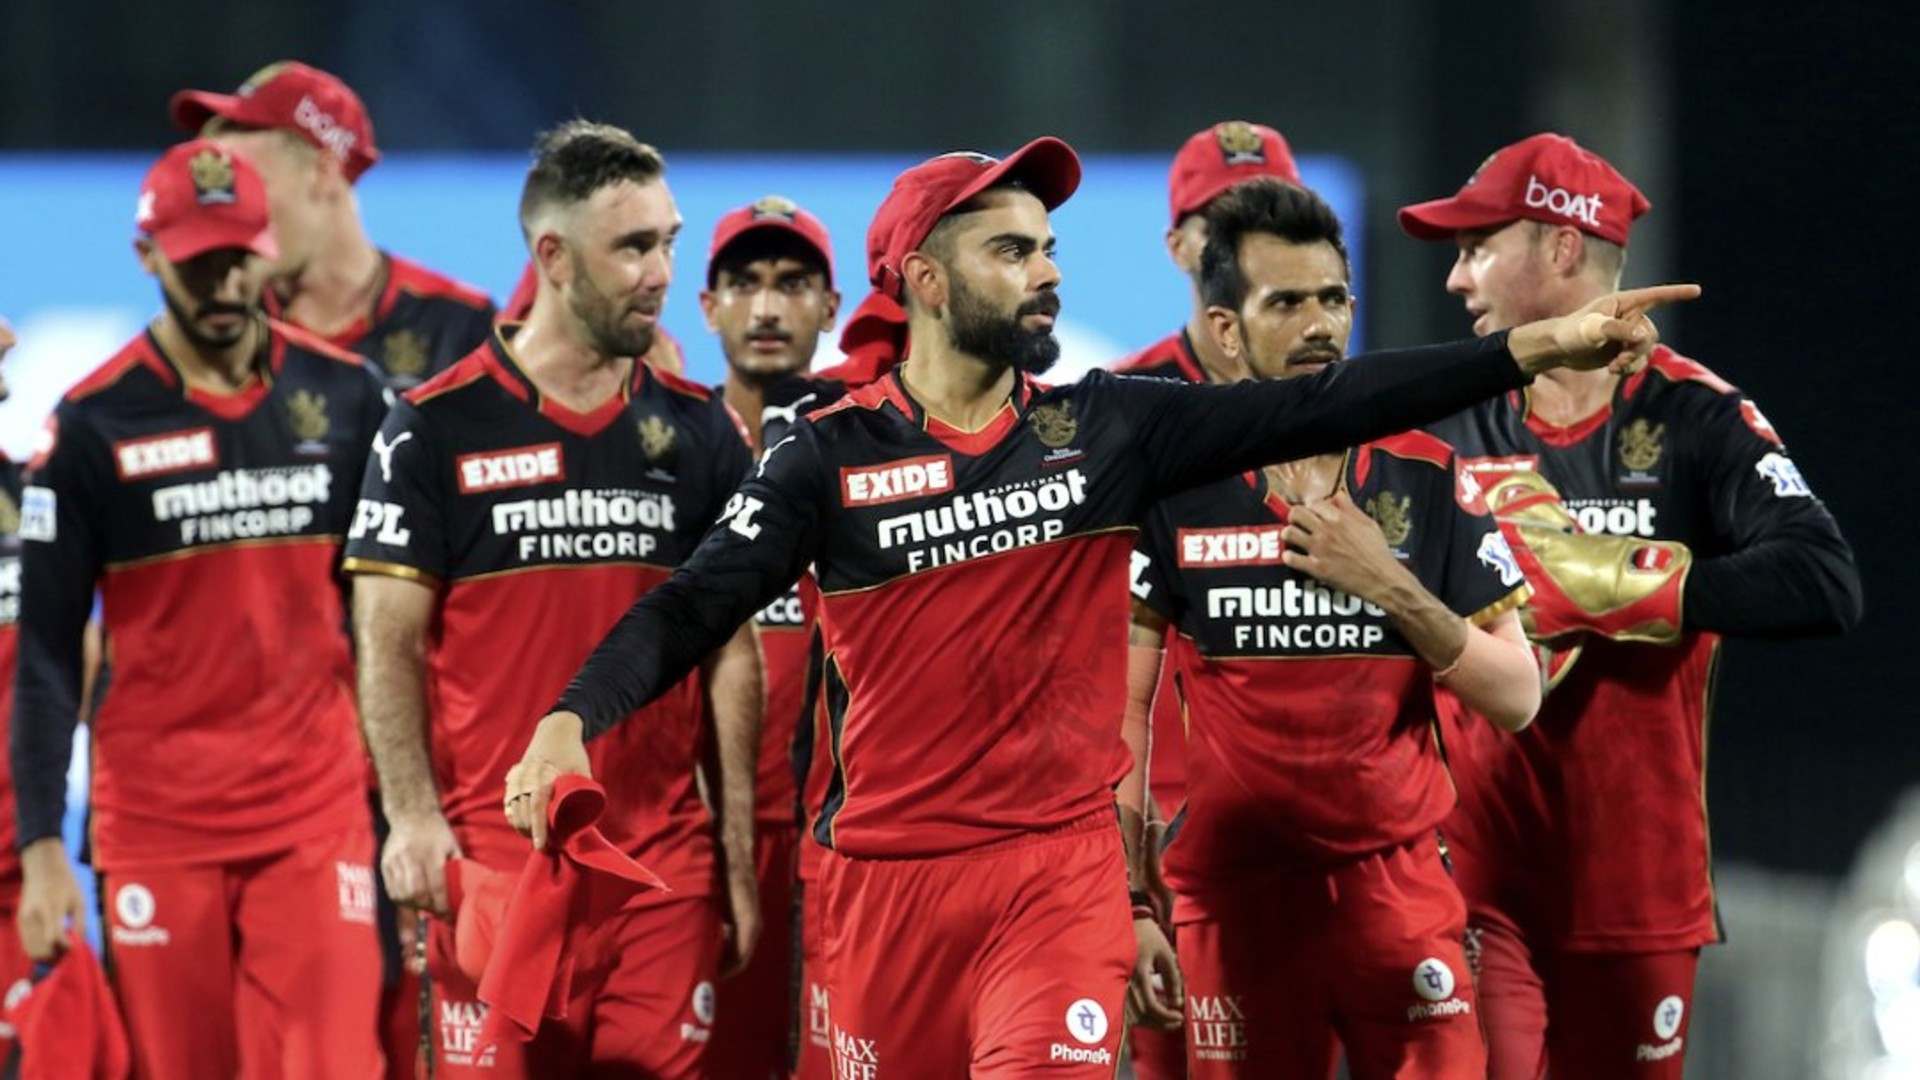 Royal Challengers Bangalore have been excellent in IPL 2021. (Image Credit: Twitter)